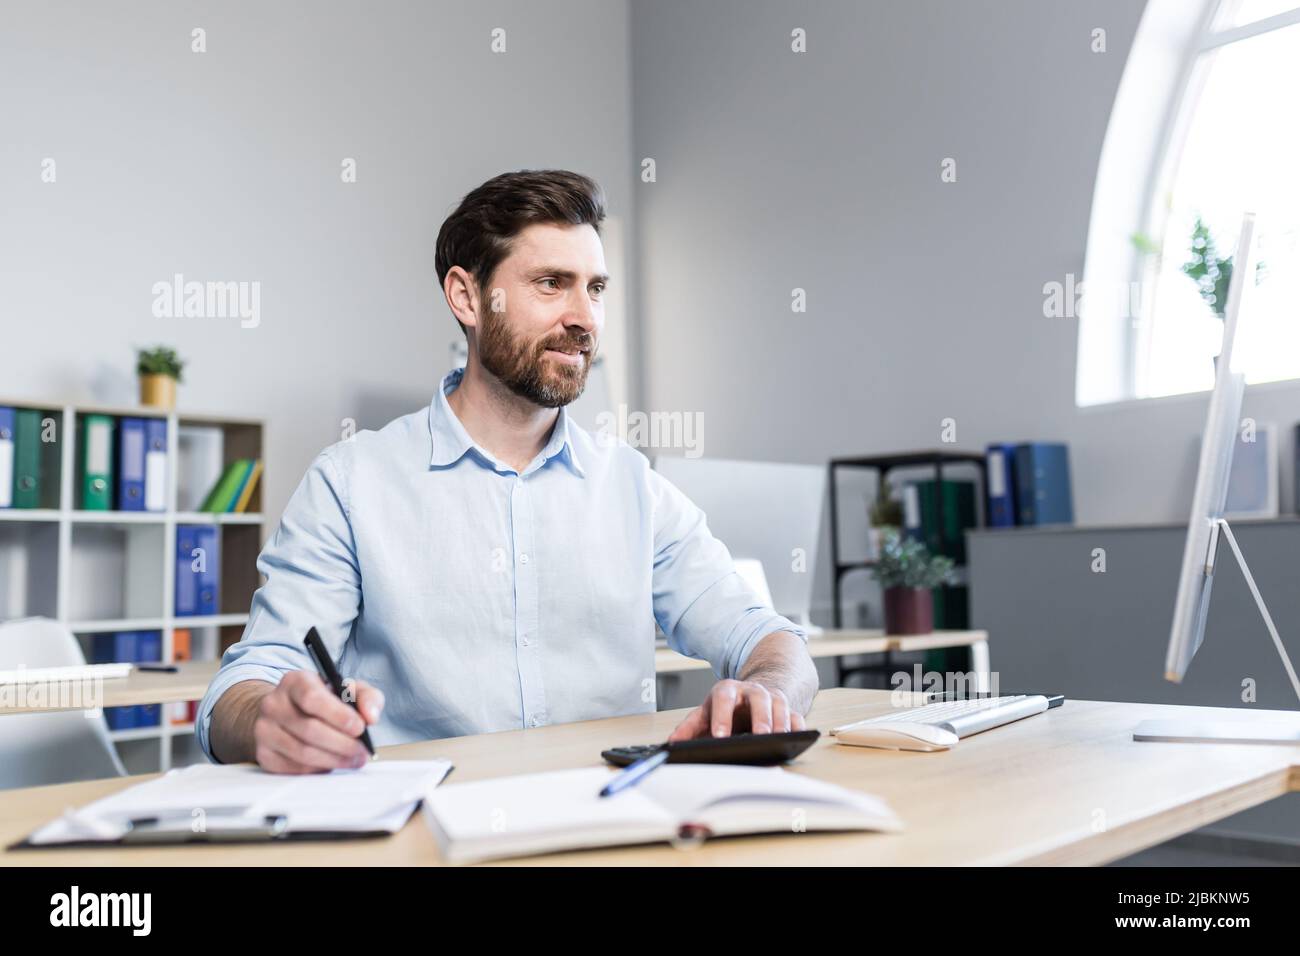 Portrait of a young man. Accountant, economist, financier. Counts on a calculator, sits at a desk at the computer, works with documents Stock Photo